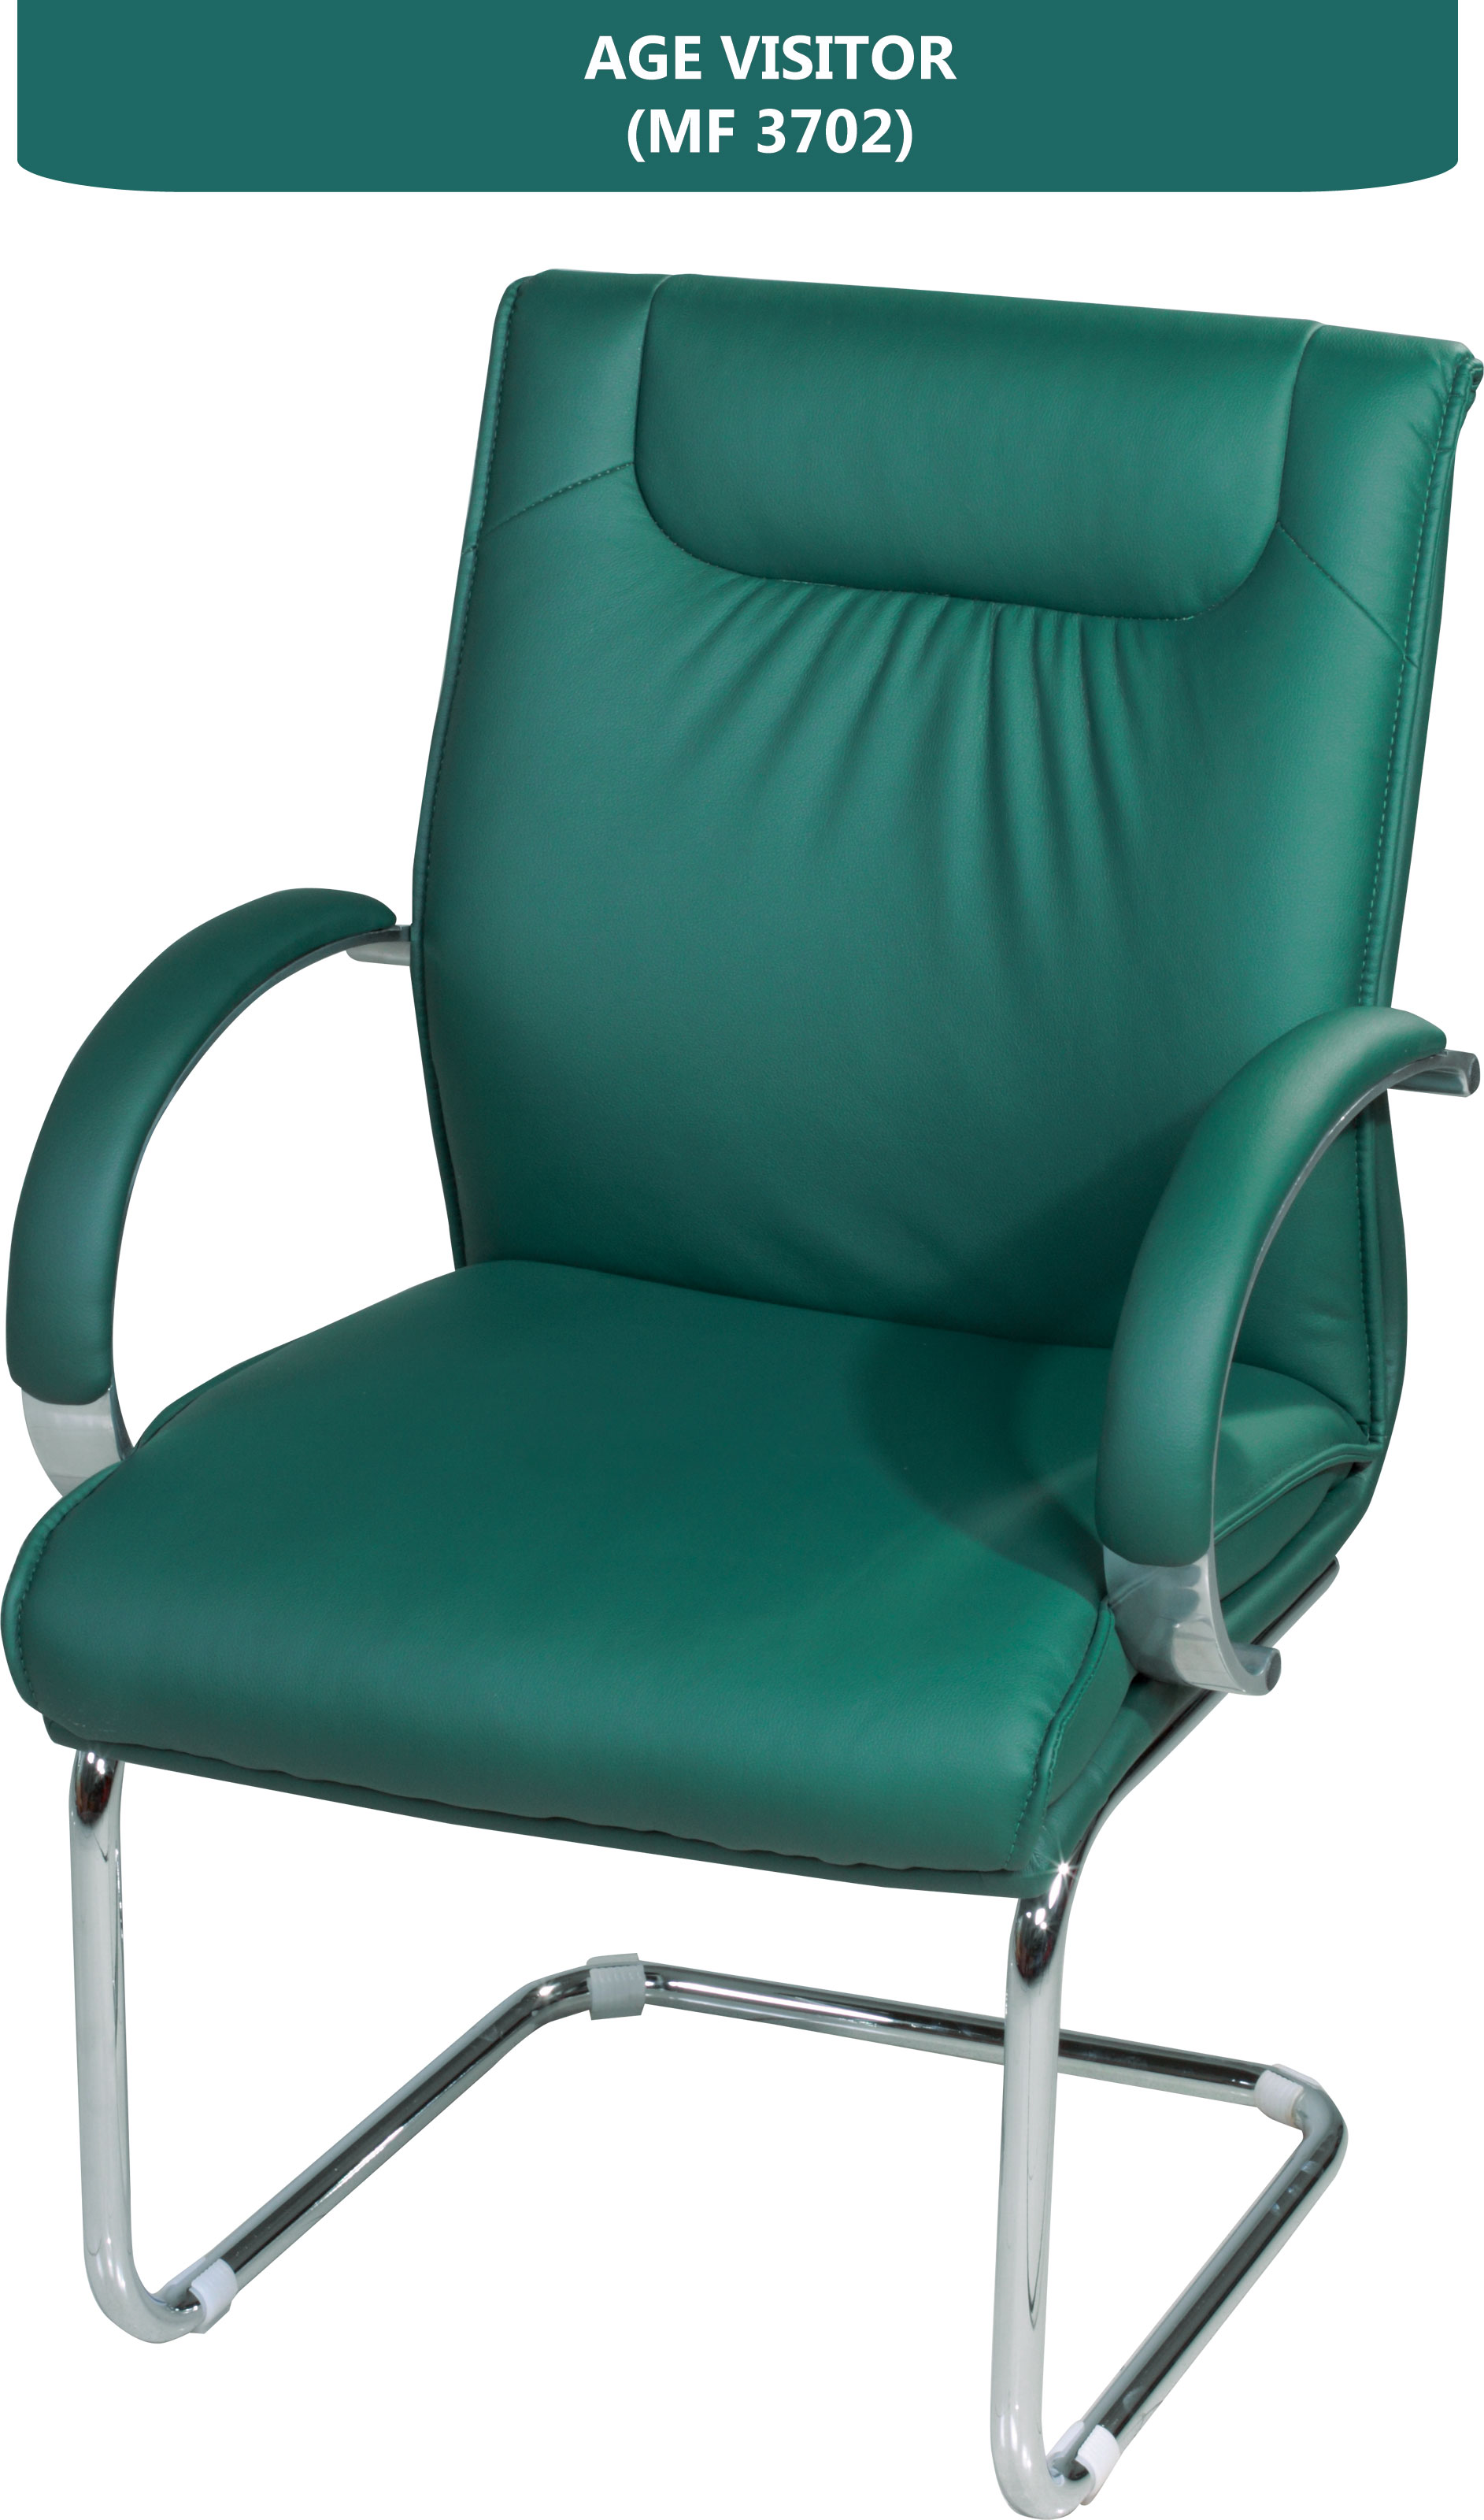 Age Visitor Chair